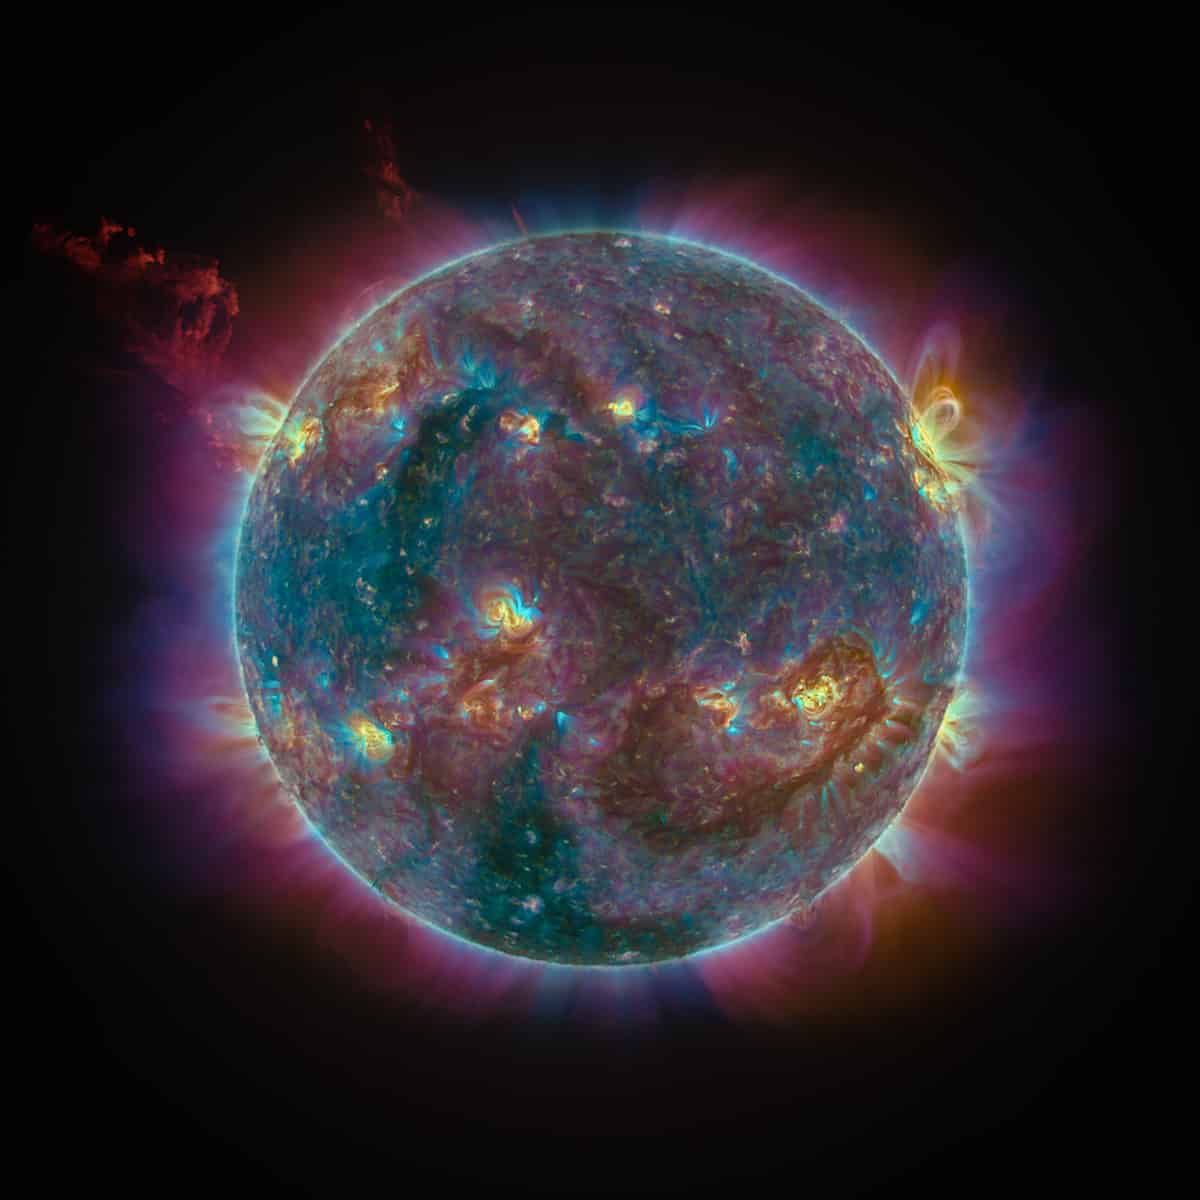 Colorful Image of the Sun and Its Solar Activity